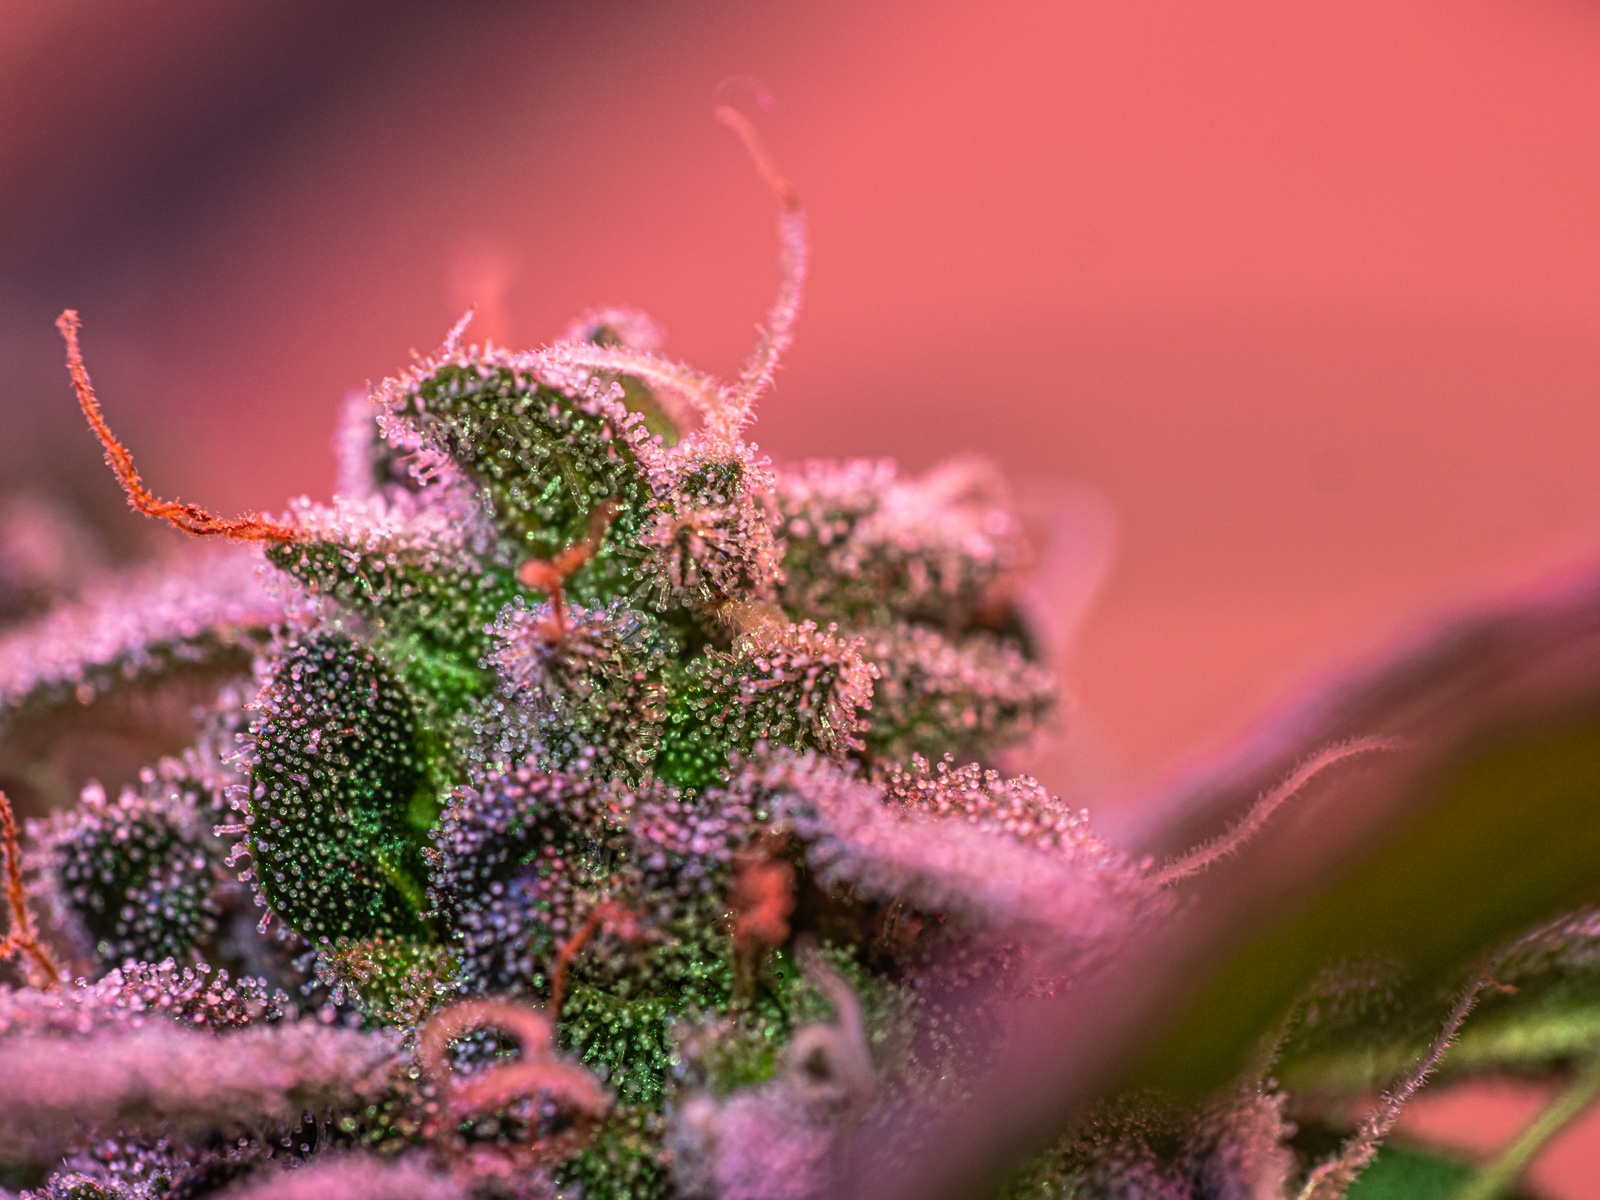 First attempts at macro photography of cannabis 2